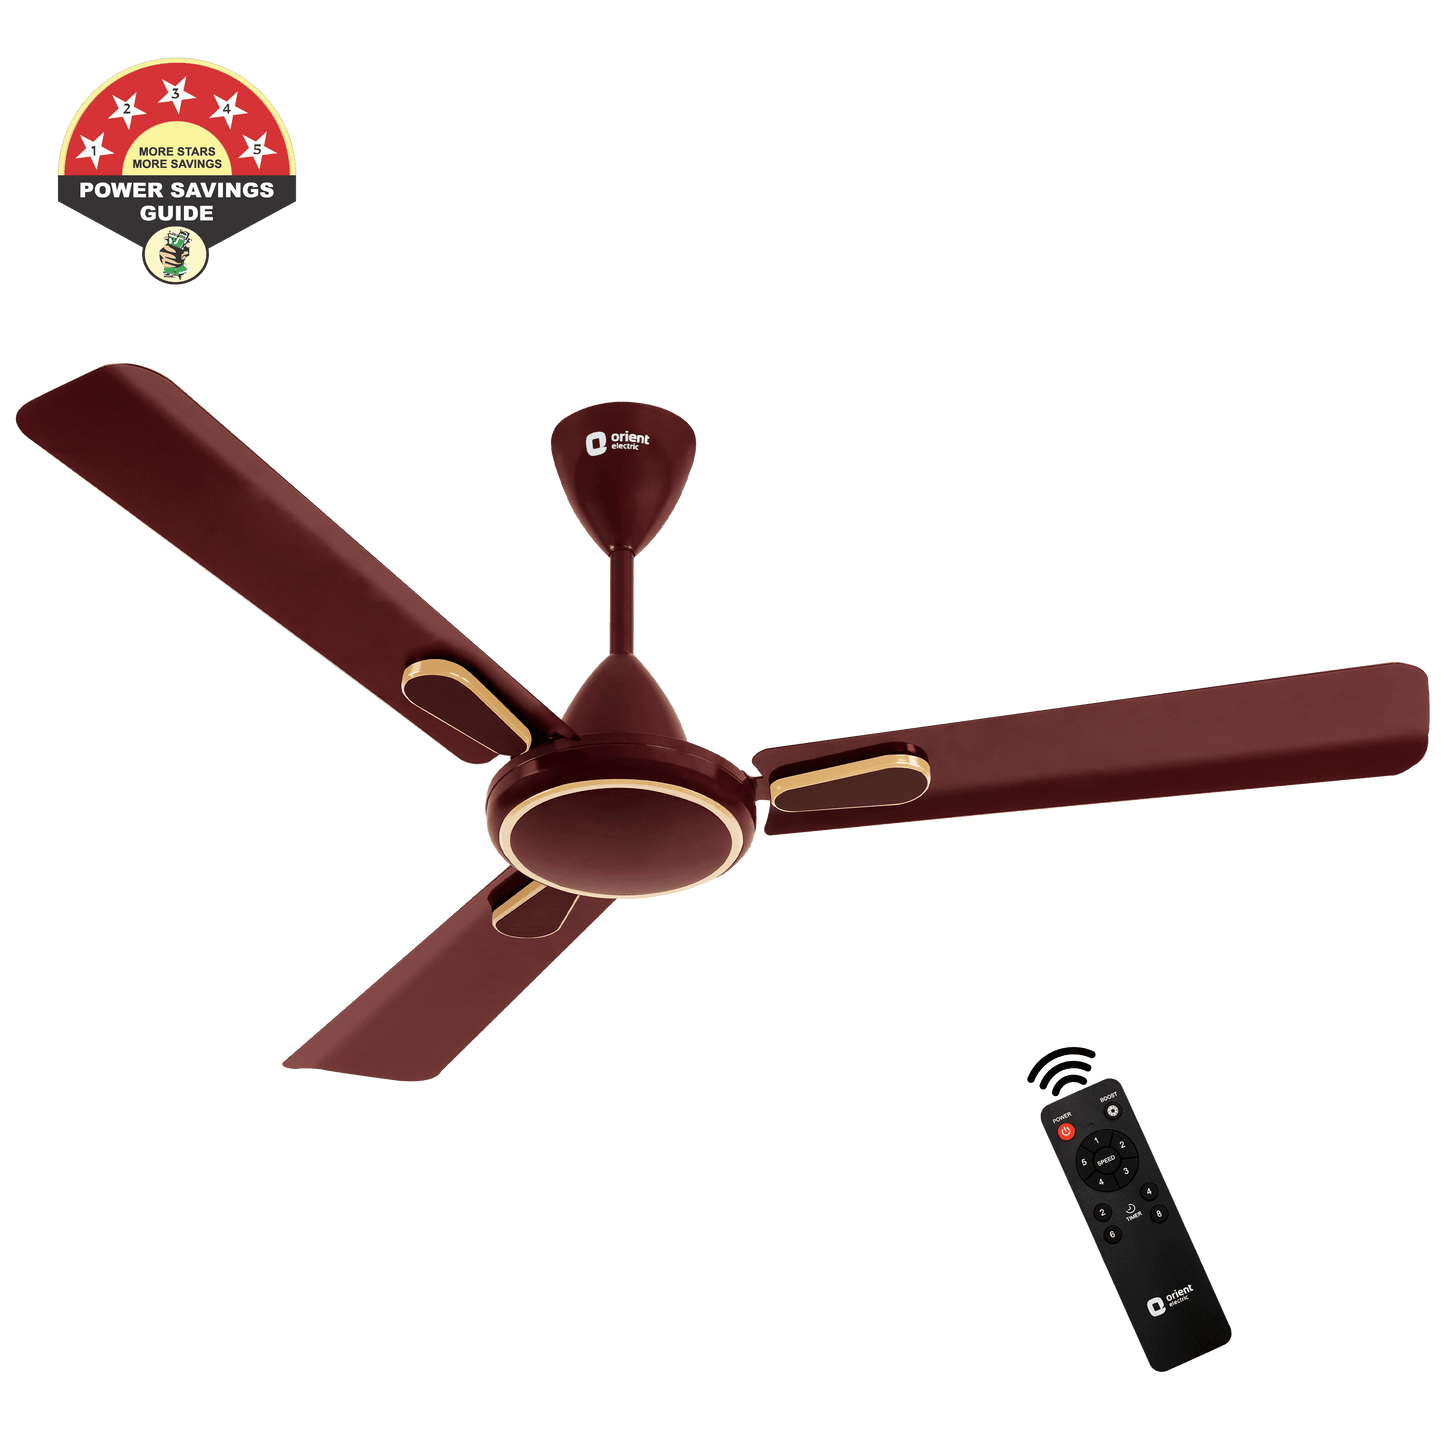 1200MM Hector Deco BLDC Ceiling Fan with Remote